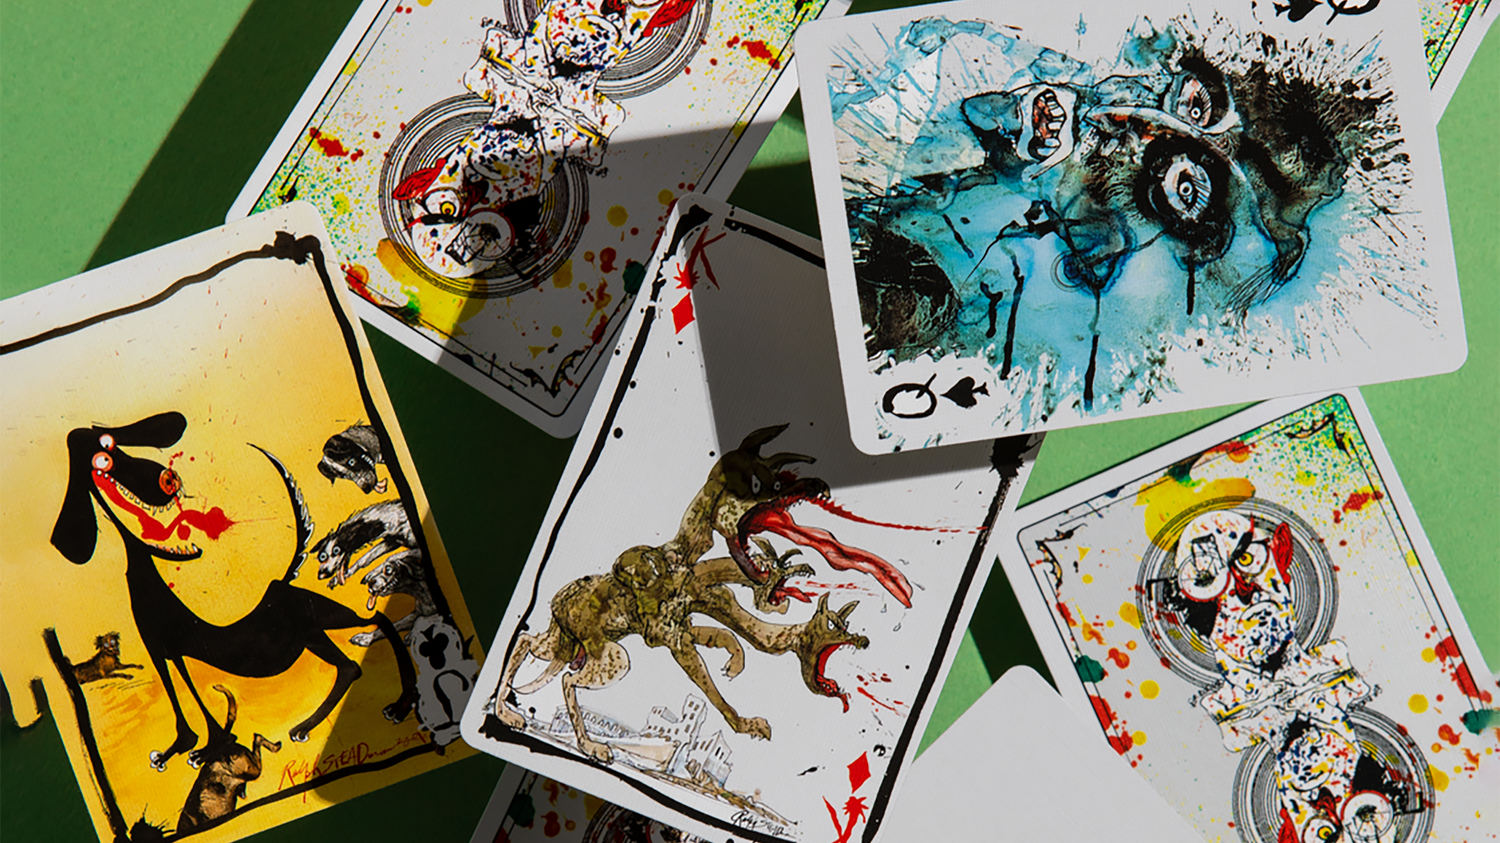 Flying Dog V2 by Art of Play : Playing cards, Poker, Magic, Cardistry, Singapore